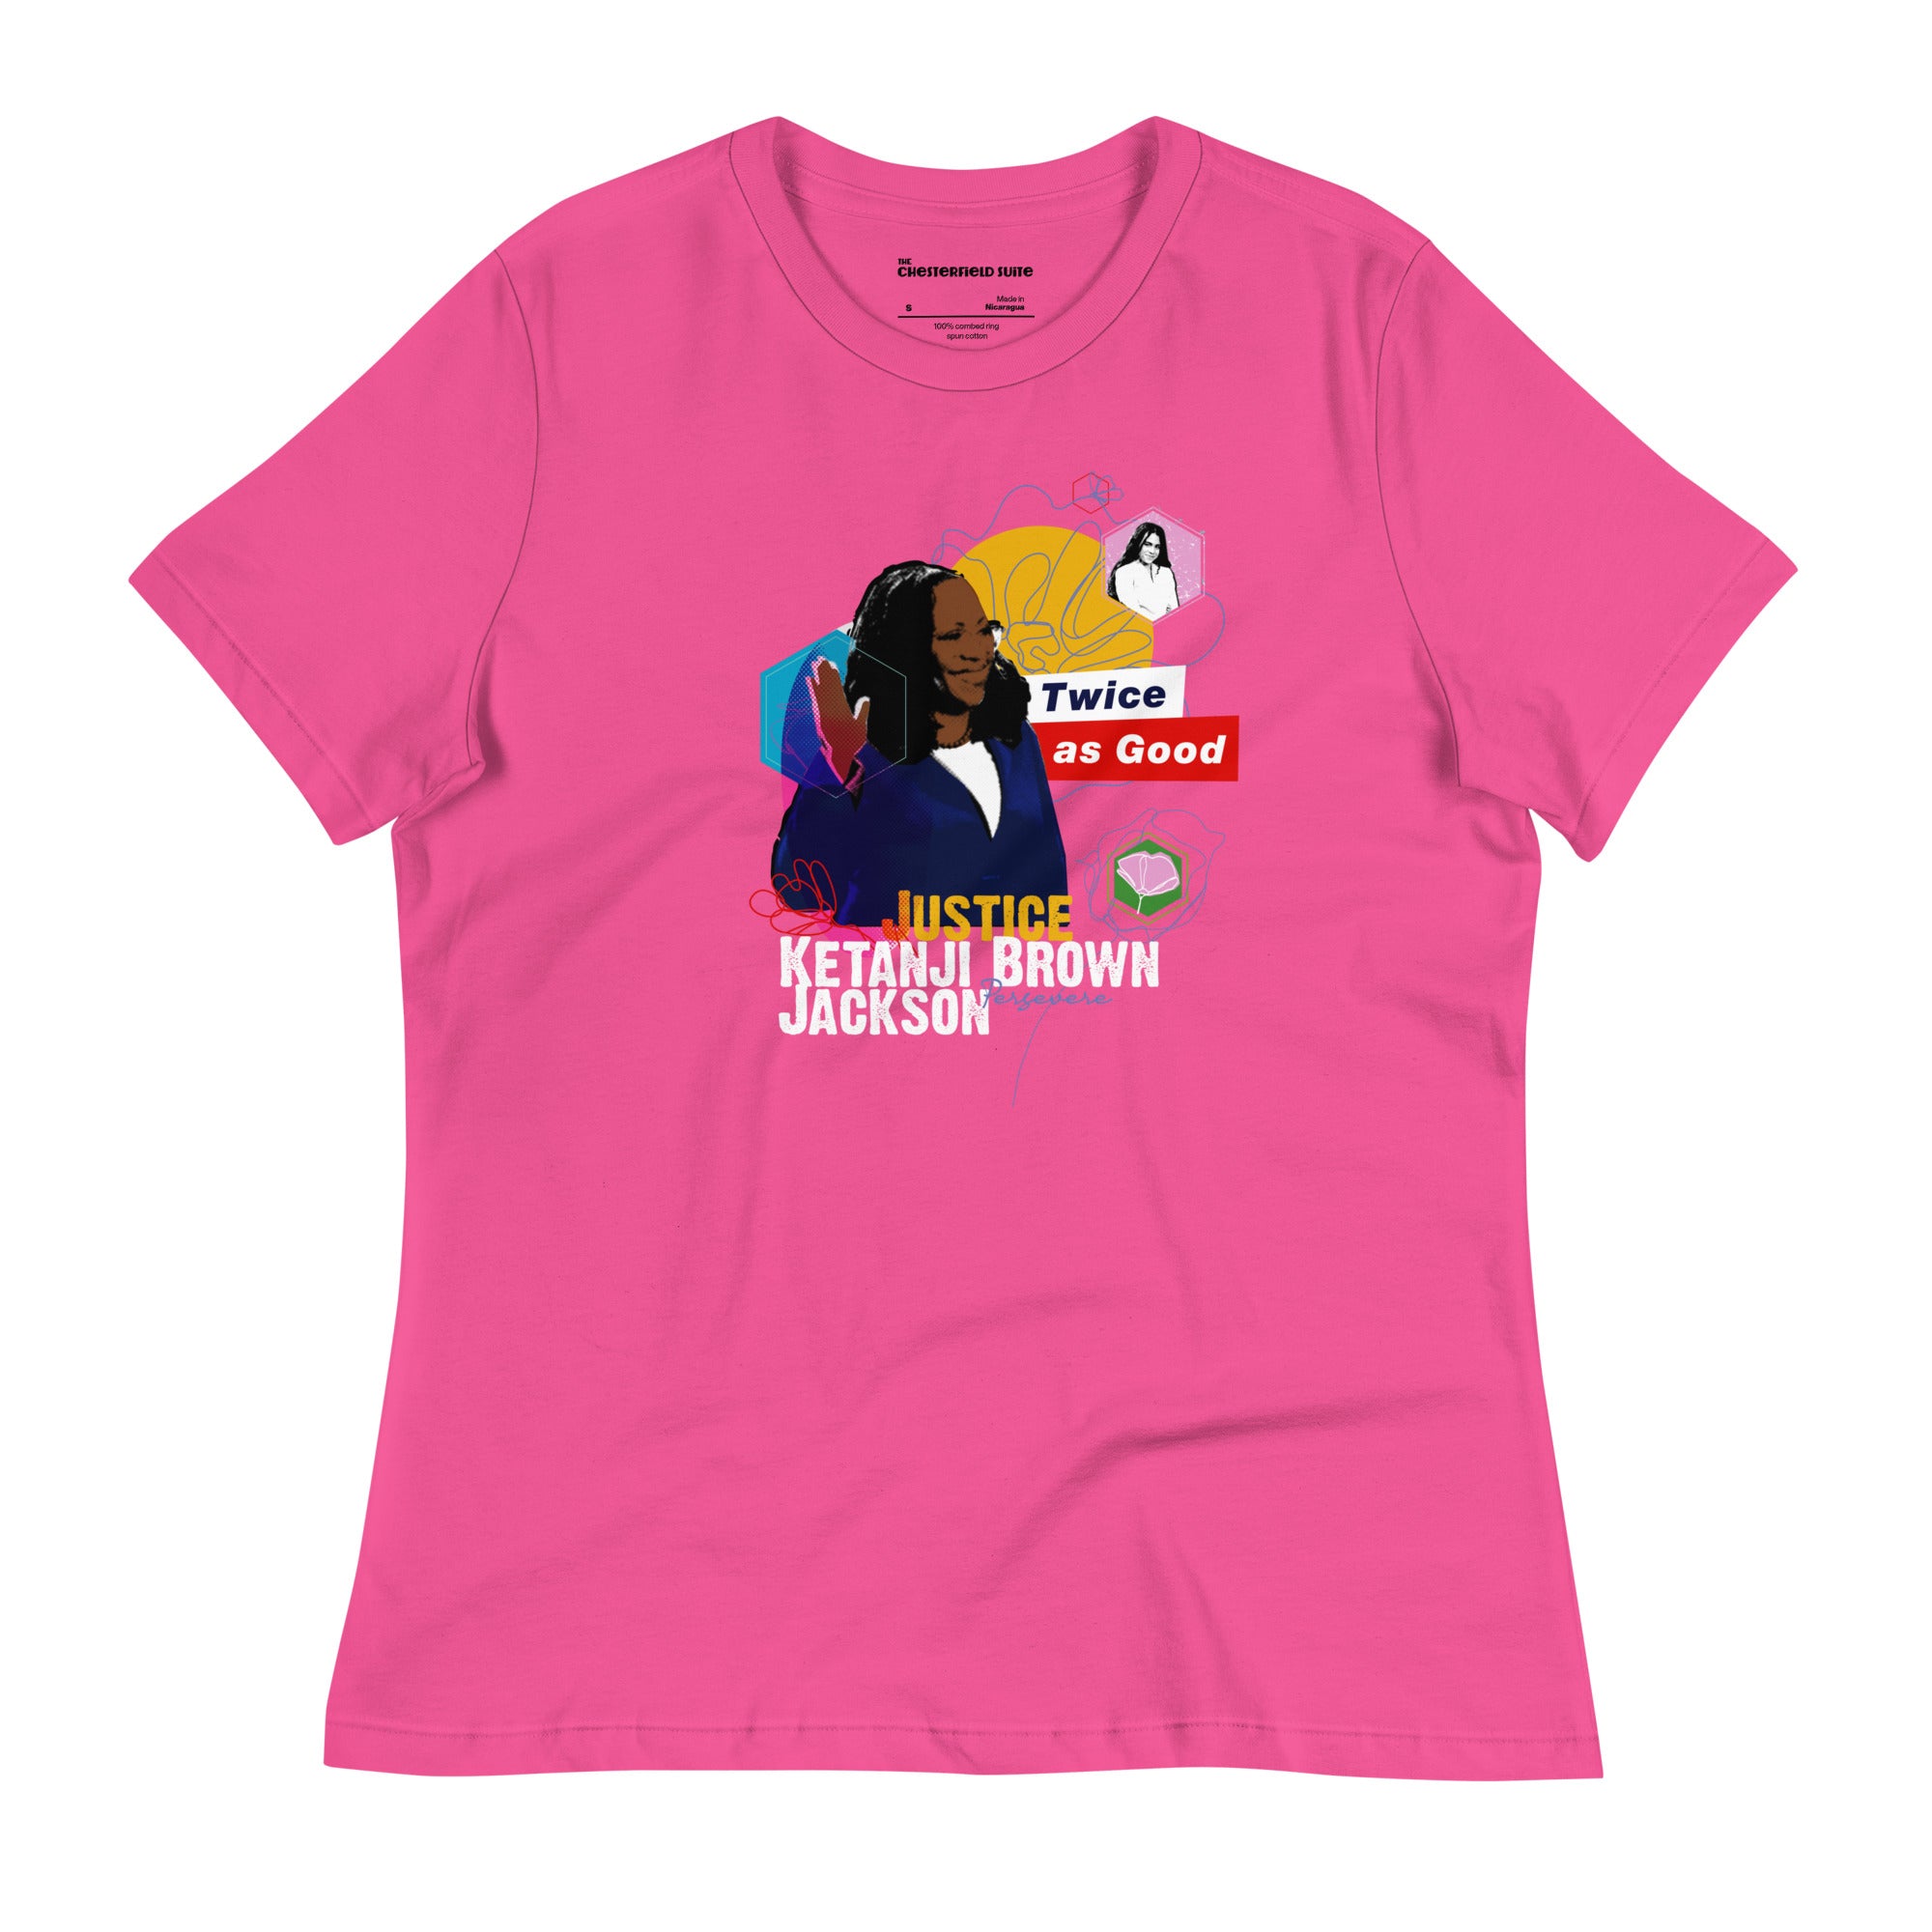 design with pink background of justice ketanji brown jackson, her daughter and the phrase "twice as good"